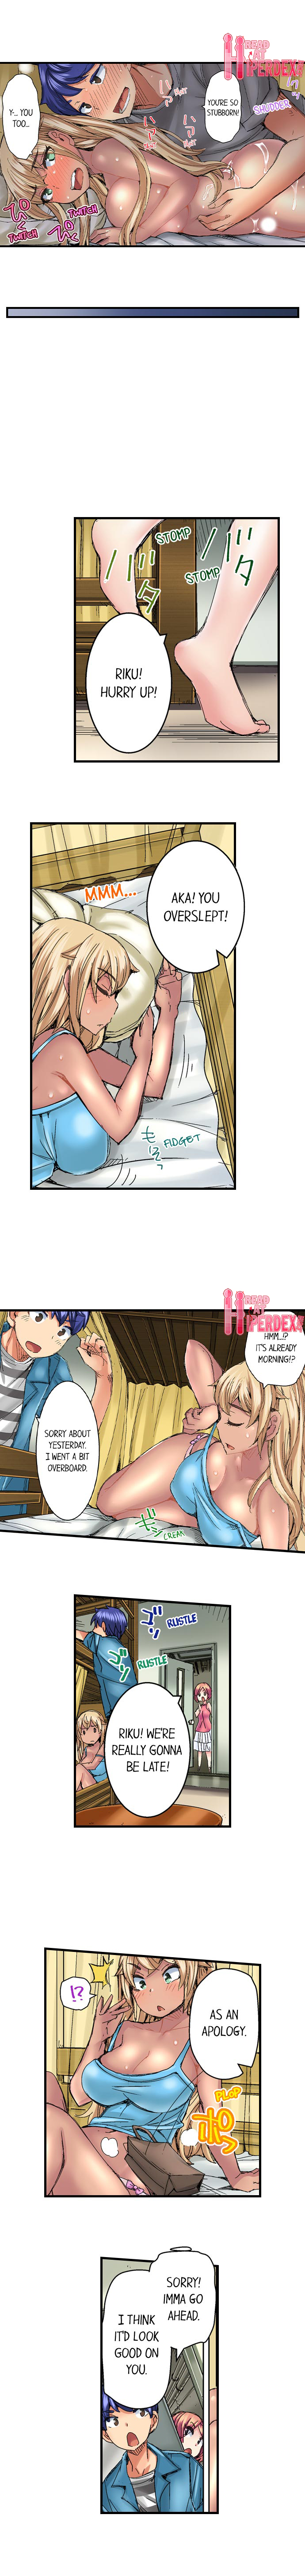 Taking a Hot Tanned Chick’s Virginity - Chapter 28 Page 6